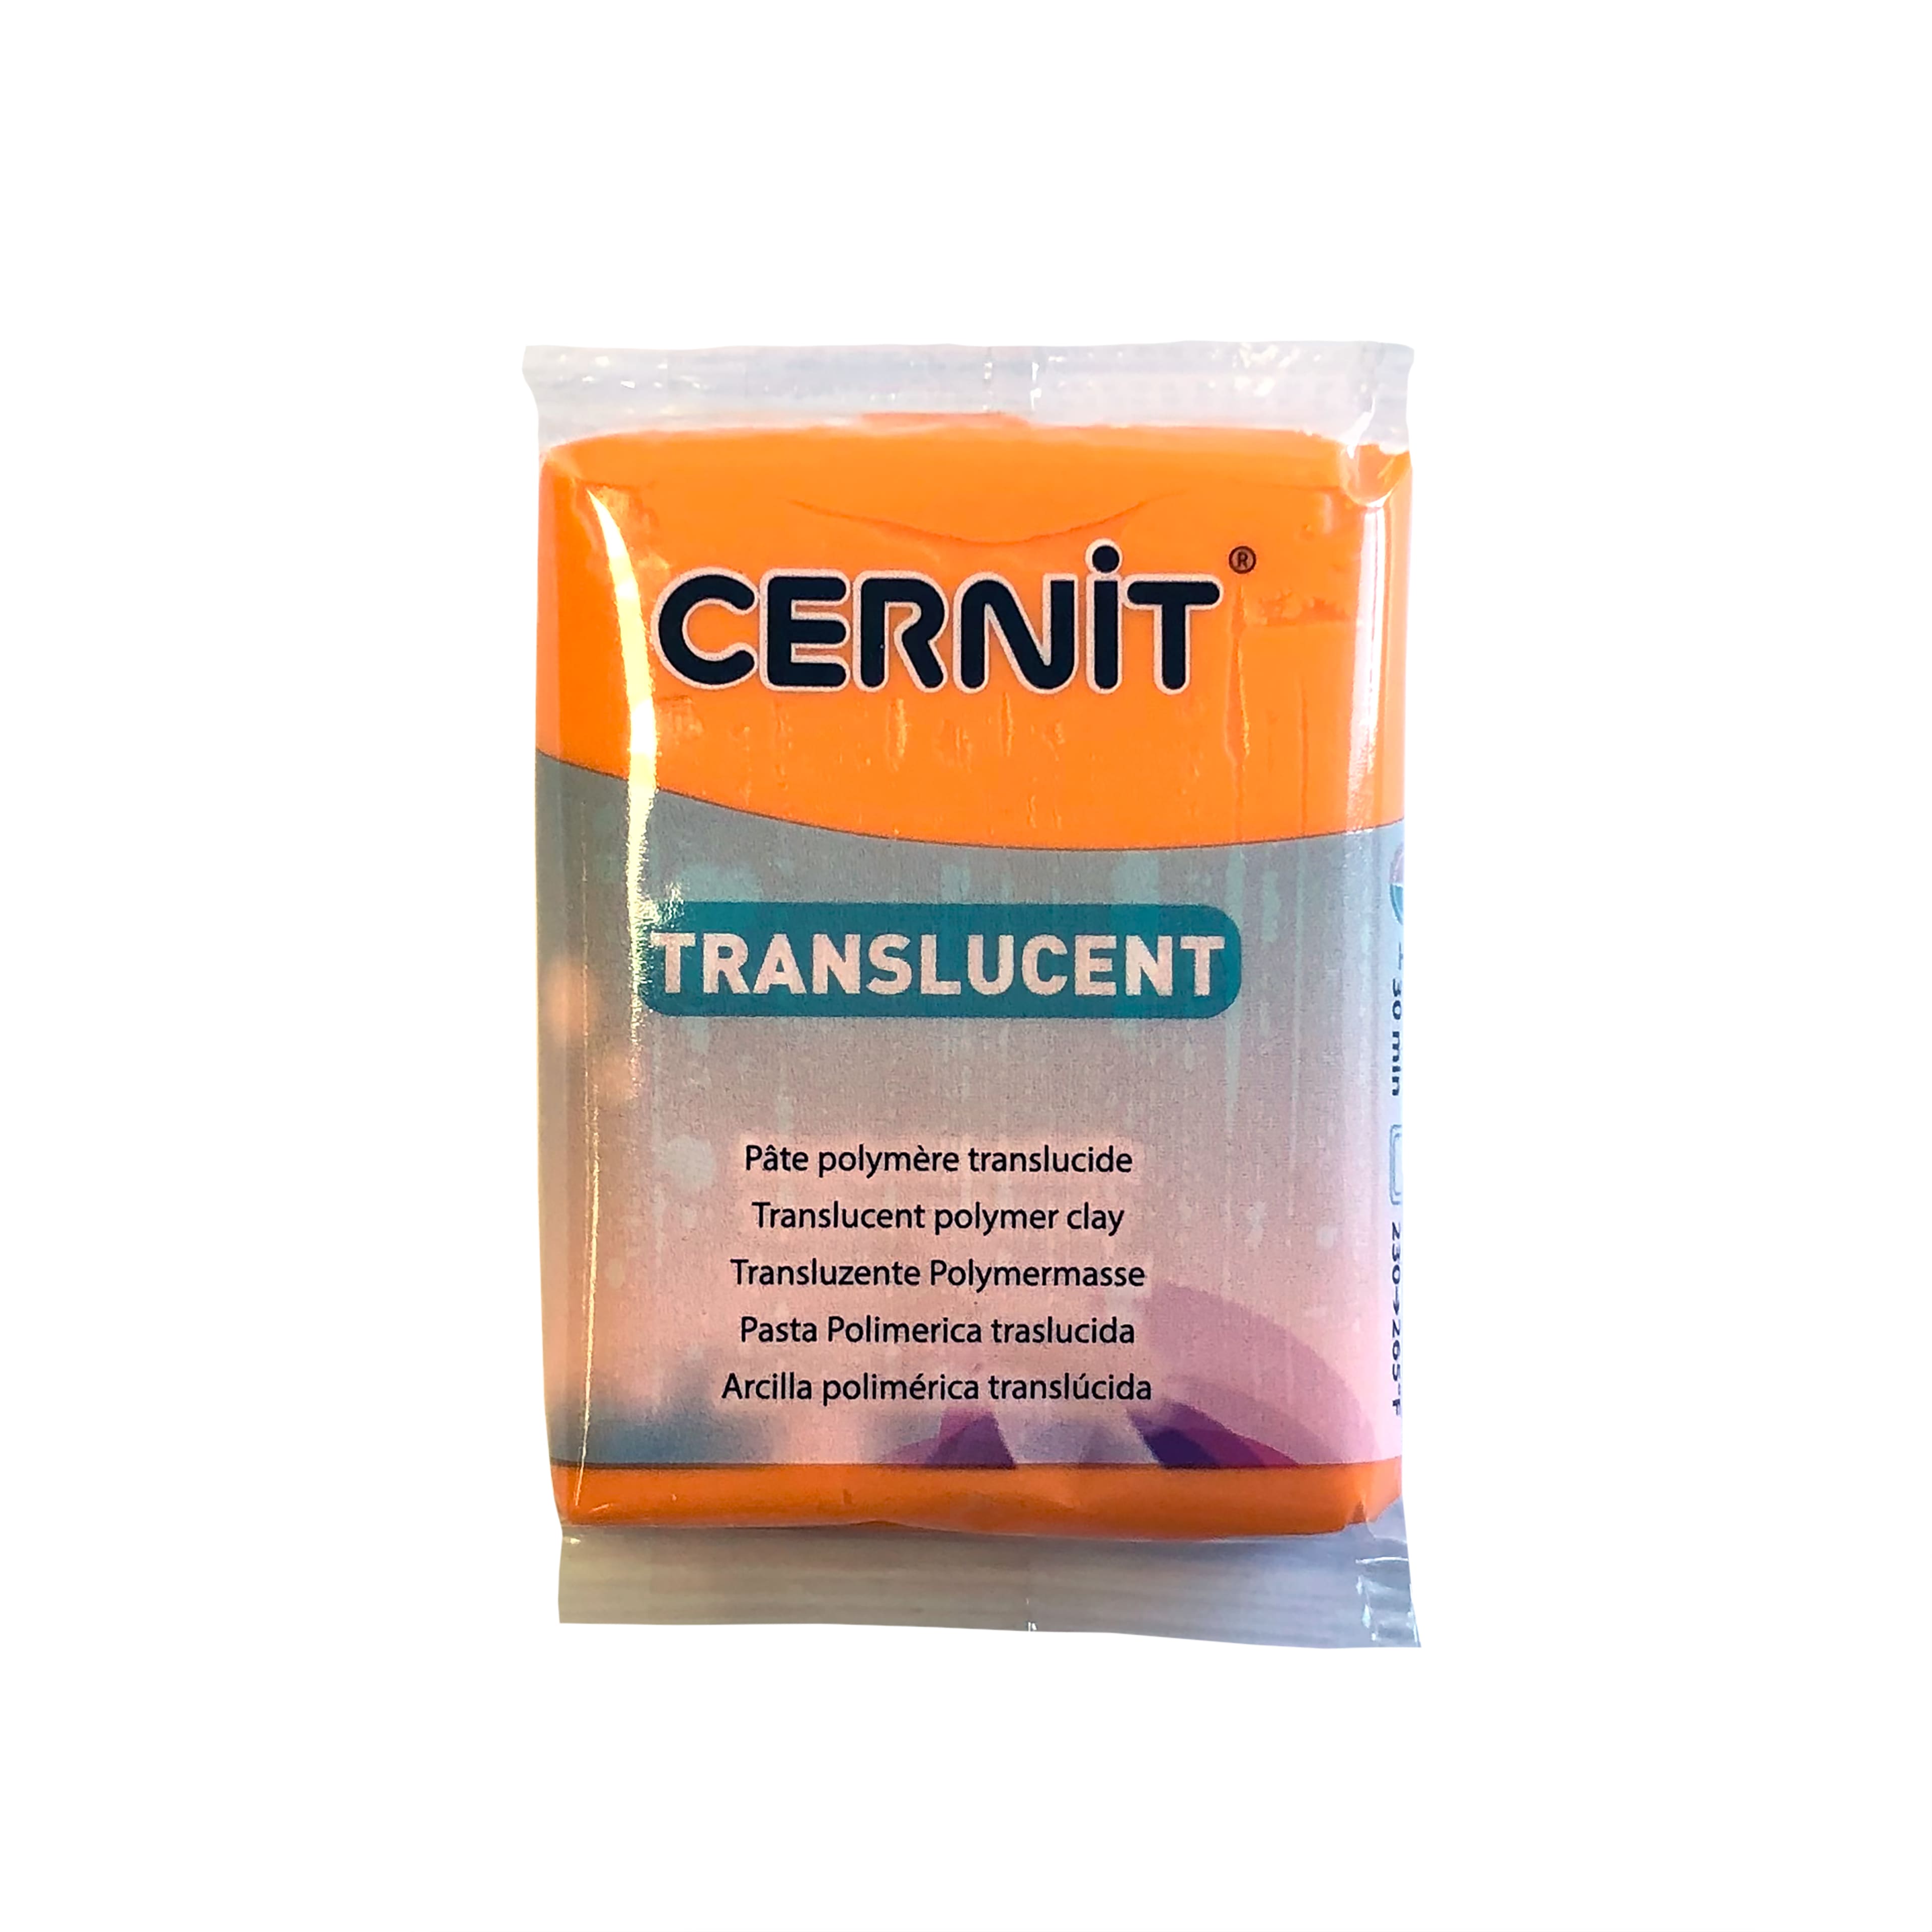 CERNIT Translucent Serie Polymer Clay, Lime Green, Nr. 605 Polymer